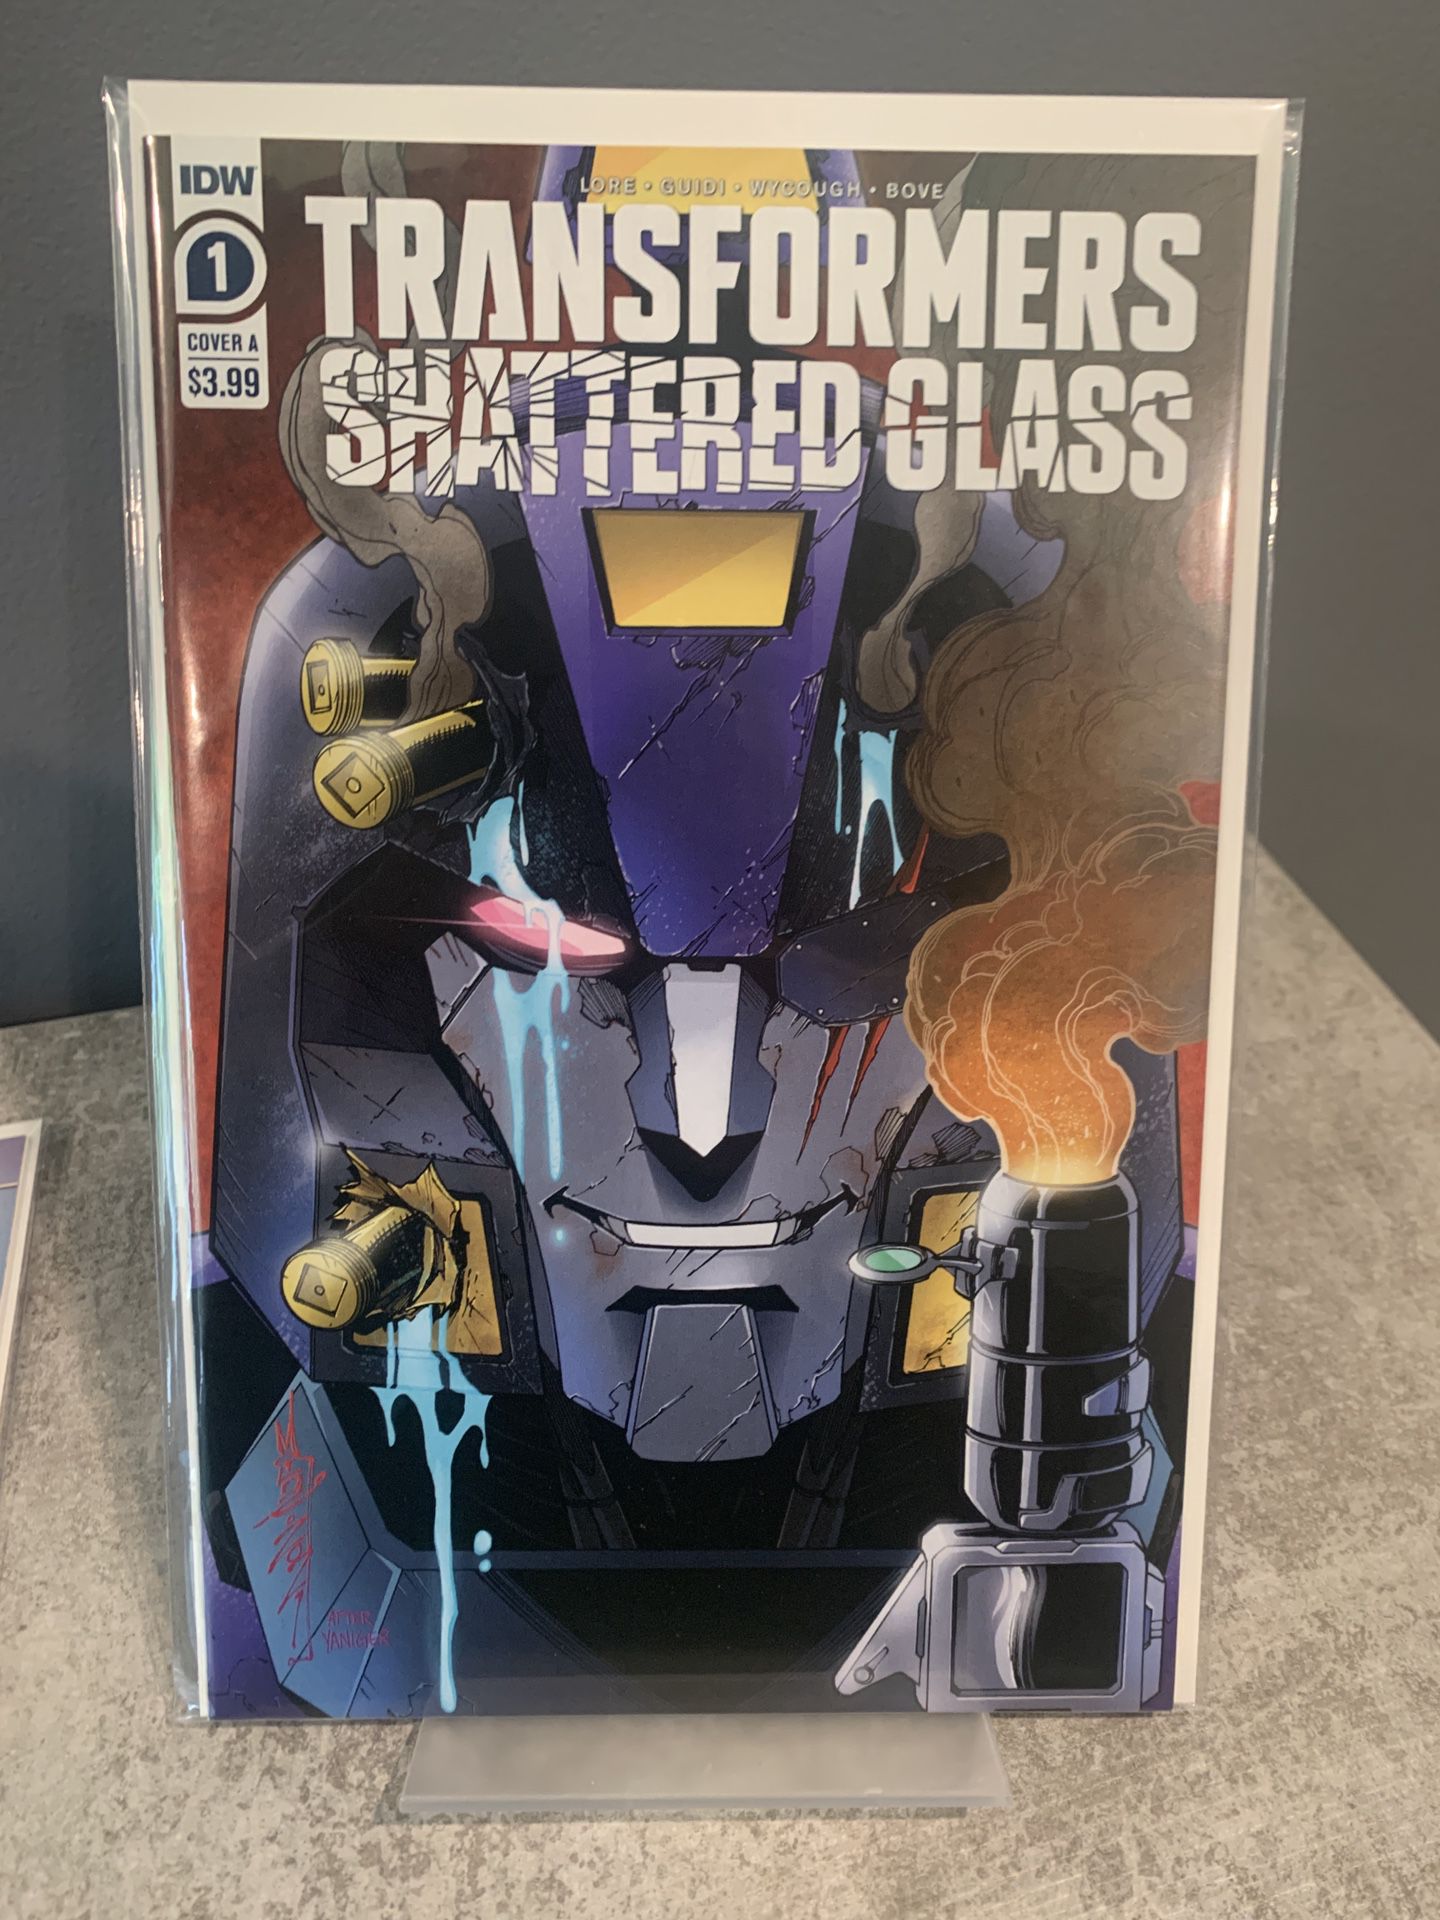 Transformers: Shattered Glass #1 (IDW Publishing, 2021)